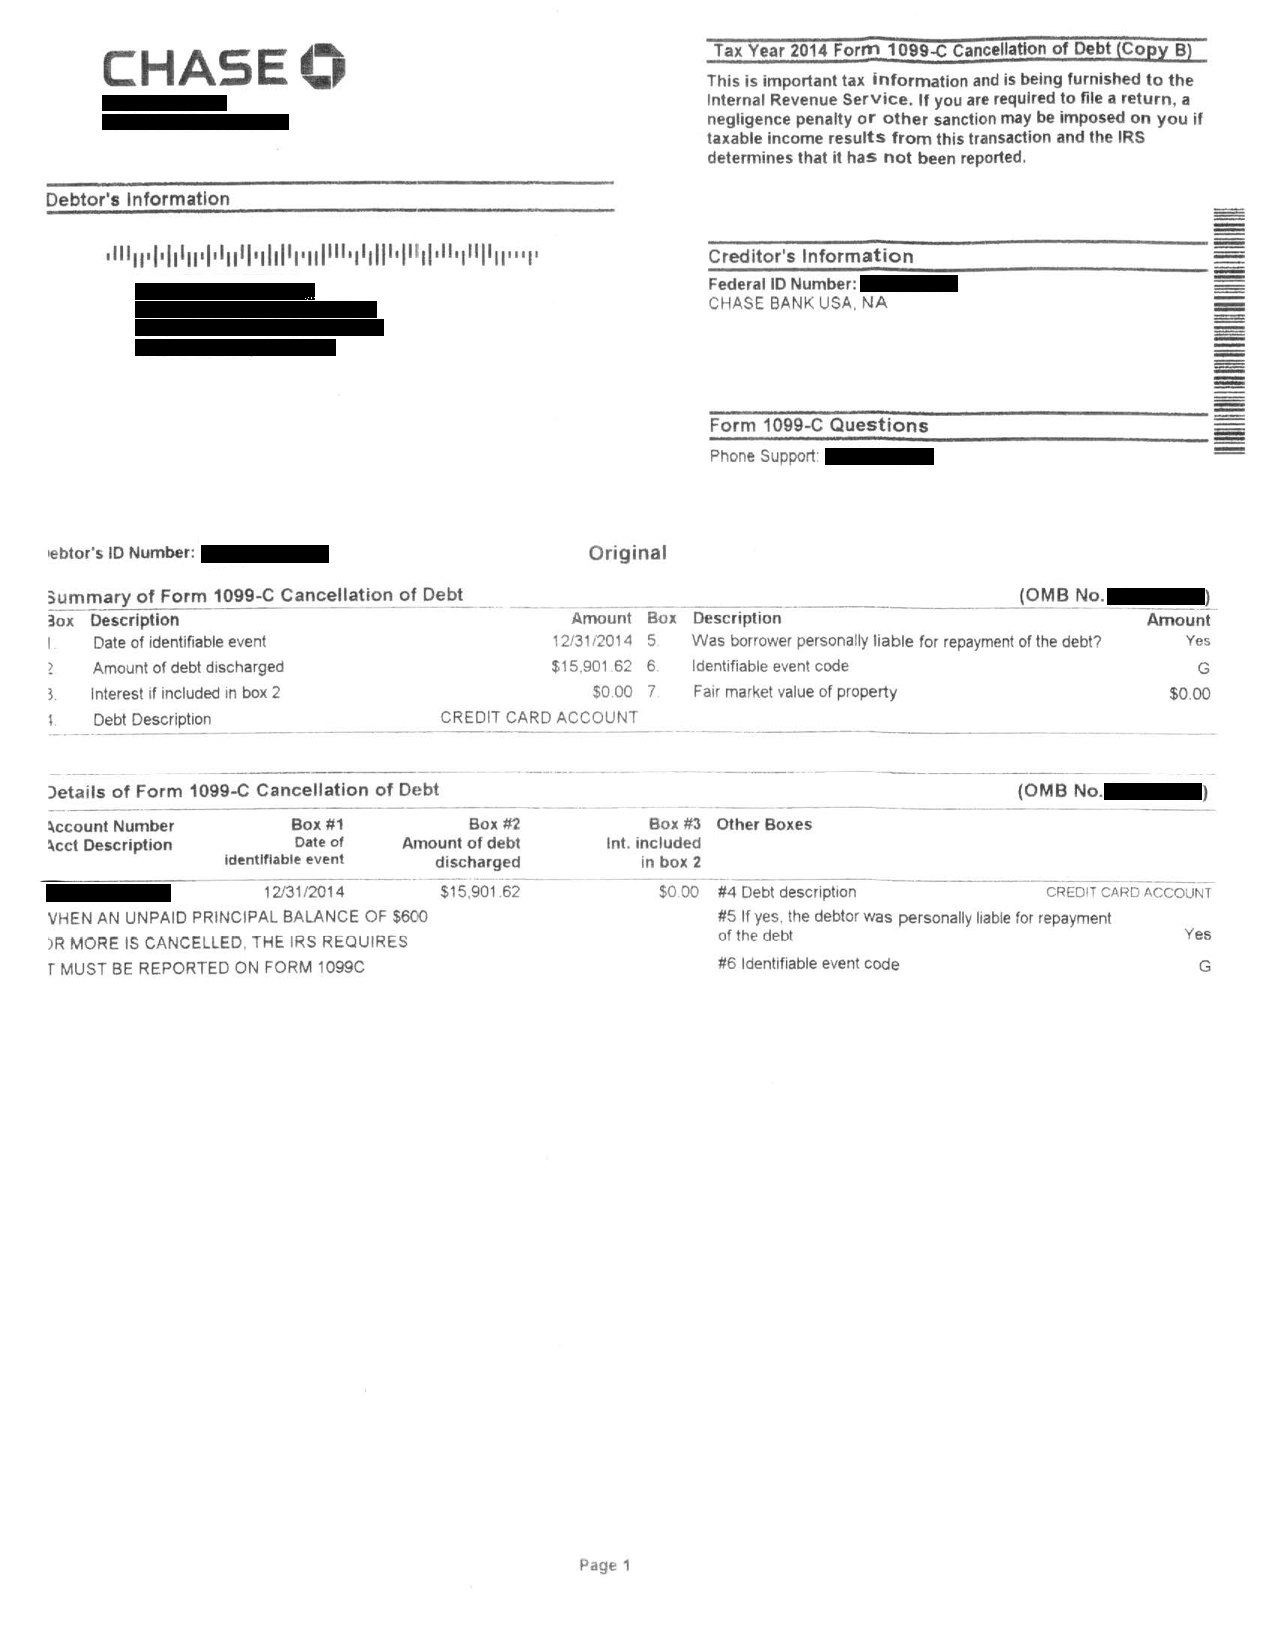 Image of a settlement letter with Chase Bank USA America with savings of 15,901 dollars